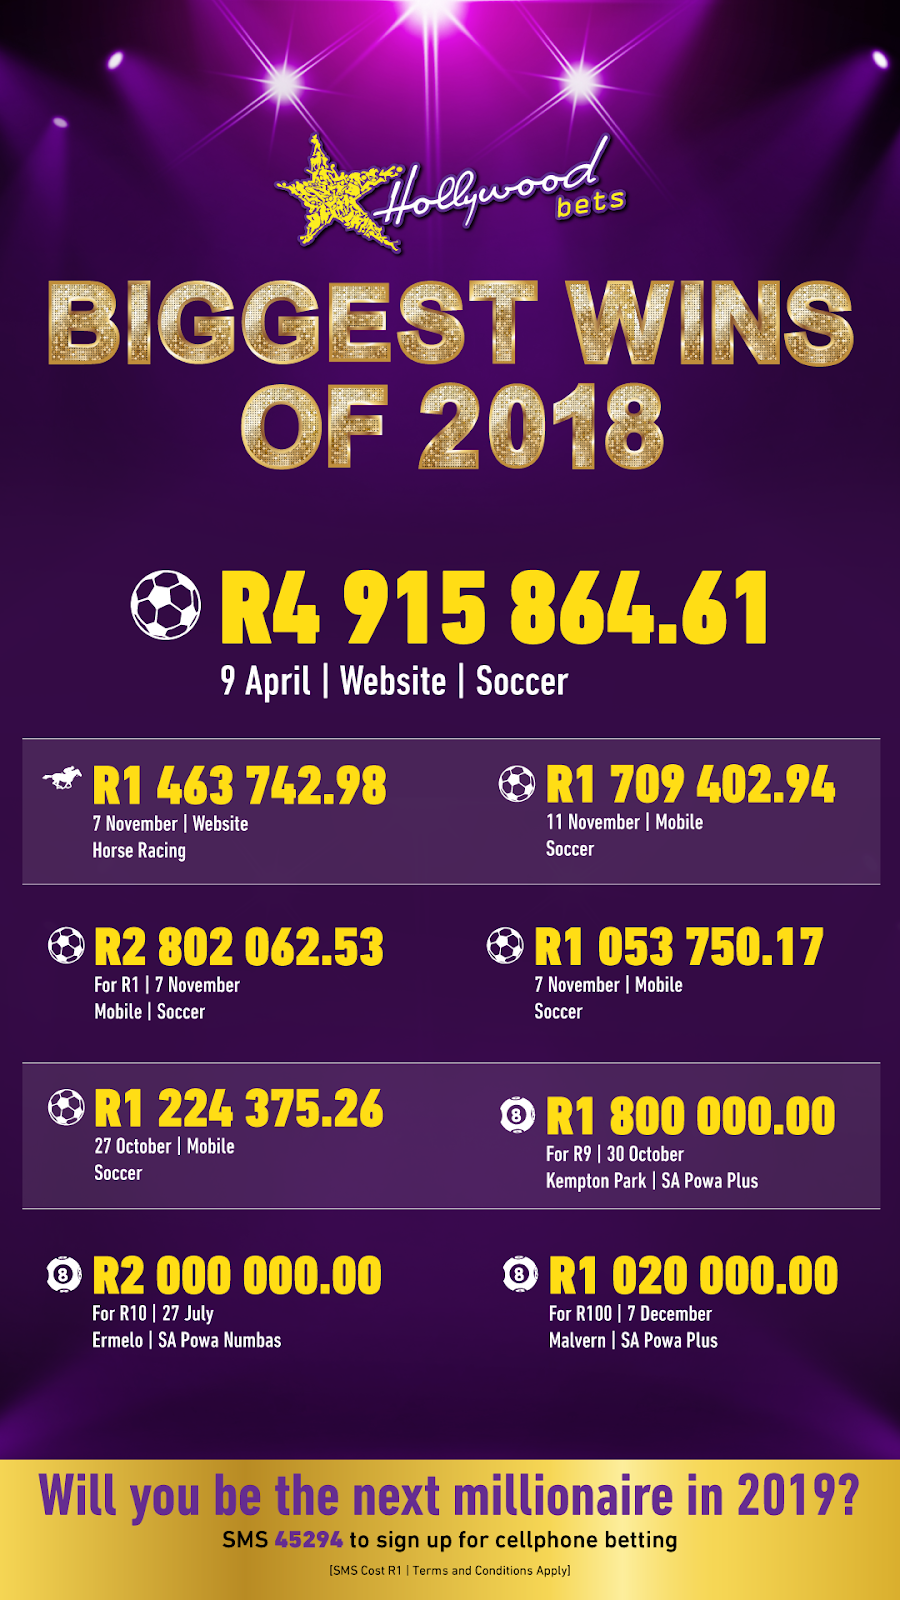 Biggest Wins of 2018 - Hollywoodbets